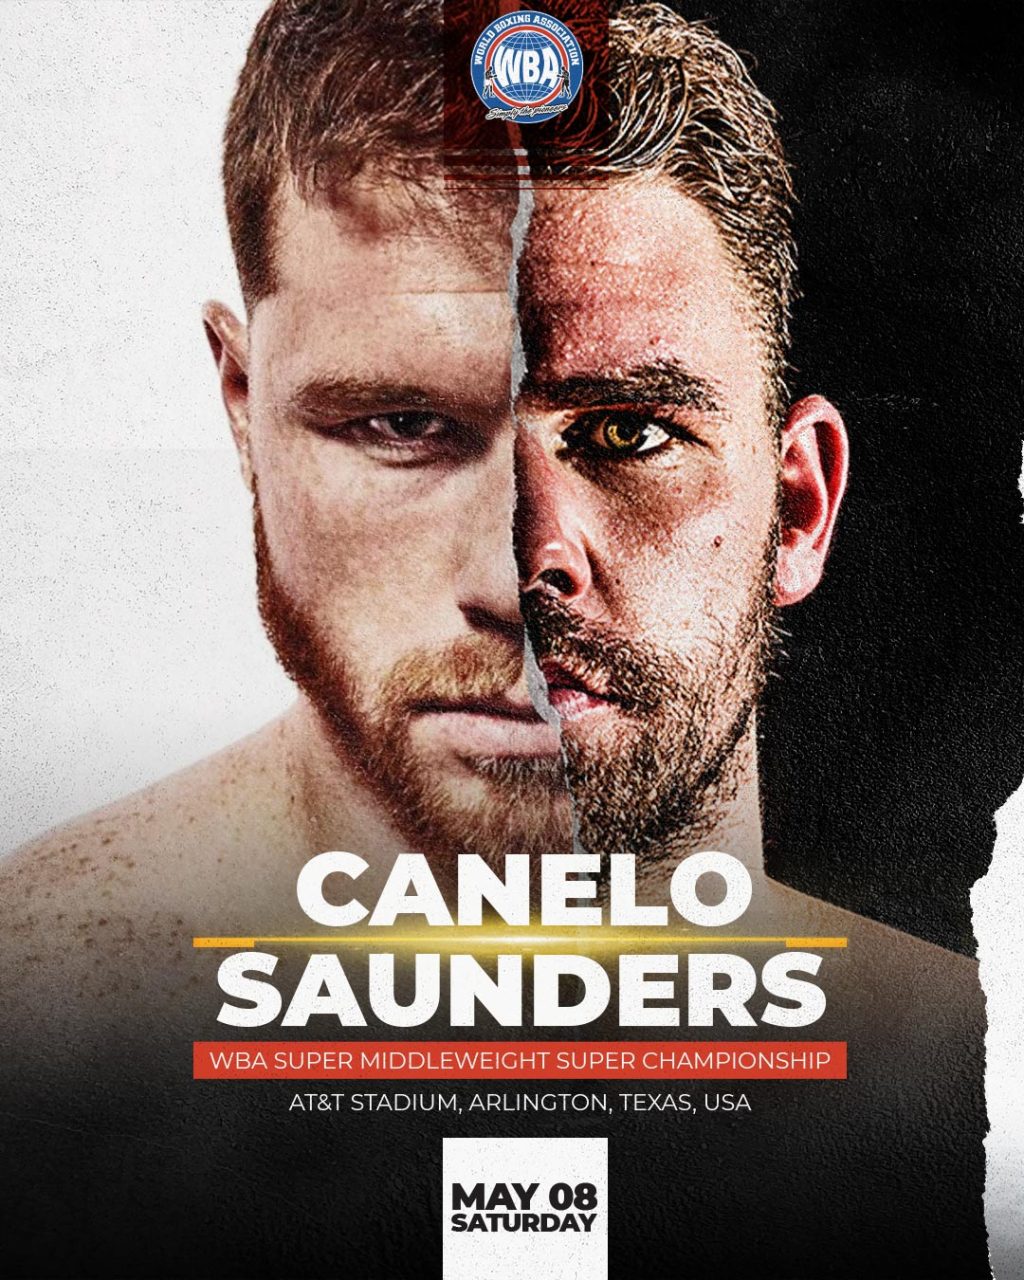 The week of Cinco de Mayo will feature Saul “Canelo” Alvarez defending his World Boxing Association (WBA) Super Middleweight Super Championship this Saturday against the tough Billy Joe Saunders at the AT&T Stadium in Dallas, Arlington, in a unification bout on May 8th. Canelo, both as a world figure in boxing and a Mexican warrior, has tried to become the icon of this special date for Mexican people and appear in the ring every first week of May. Back in 2020 it was not possible due to the pandemic but now it will be a much more special occasion to put his WBA and WBC belts on the line against WBO champion Saunders. The Guadalajara-born fighter will be making his second fight of the year against the Briton fighter. Alvarez has set his goal to win all the 168 lbs. belts and so he began his 2021 plan with a fight against Turkey’s Avni Yildirim, which led to his challenge against Saunders, another step forward in his objective. This fight is a major step up in level for Alvarez. Saunders is one of the sharpest fighters in the division, he is a southpaw and his intelligence makes him a tough opponent for Canelo’s style. Saunders, who is 31 years old, is a contemporary of Alvarez’s 30 years; however, he is 180 cm and the the Mexican is 173 cm. All promotional activities will take place this week leading up to the event hosted by Matchroom Boxing in the U.S. Alvarez has 55 wins, 1 loss, 2 draws, and 37 KOs. Saunders, on the other hand, is undefeated in 30 fights, with 14 KOs.